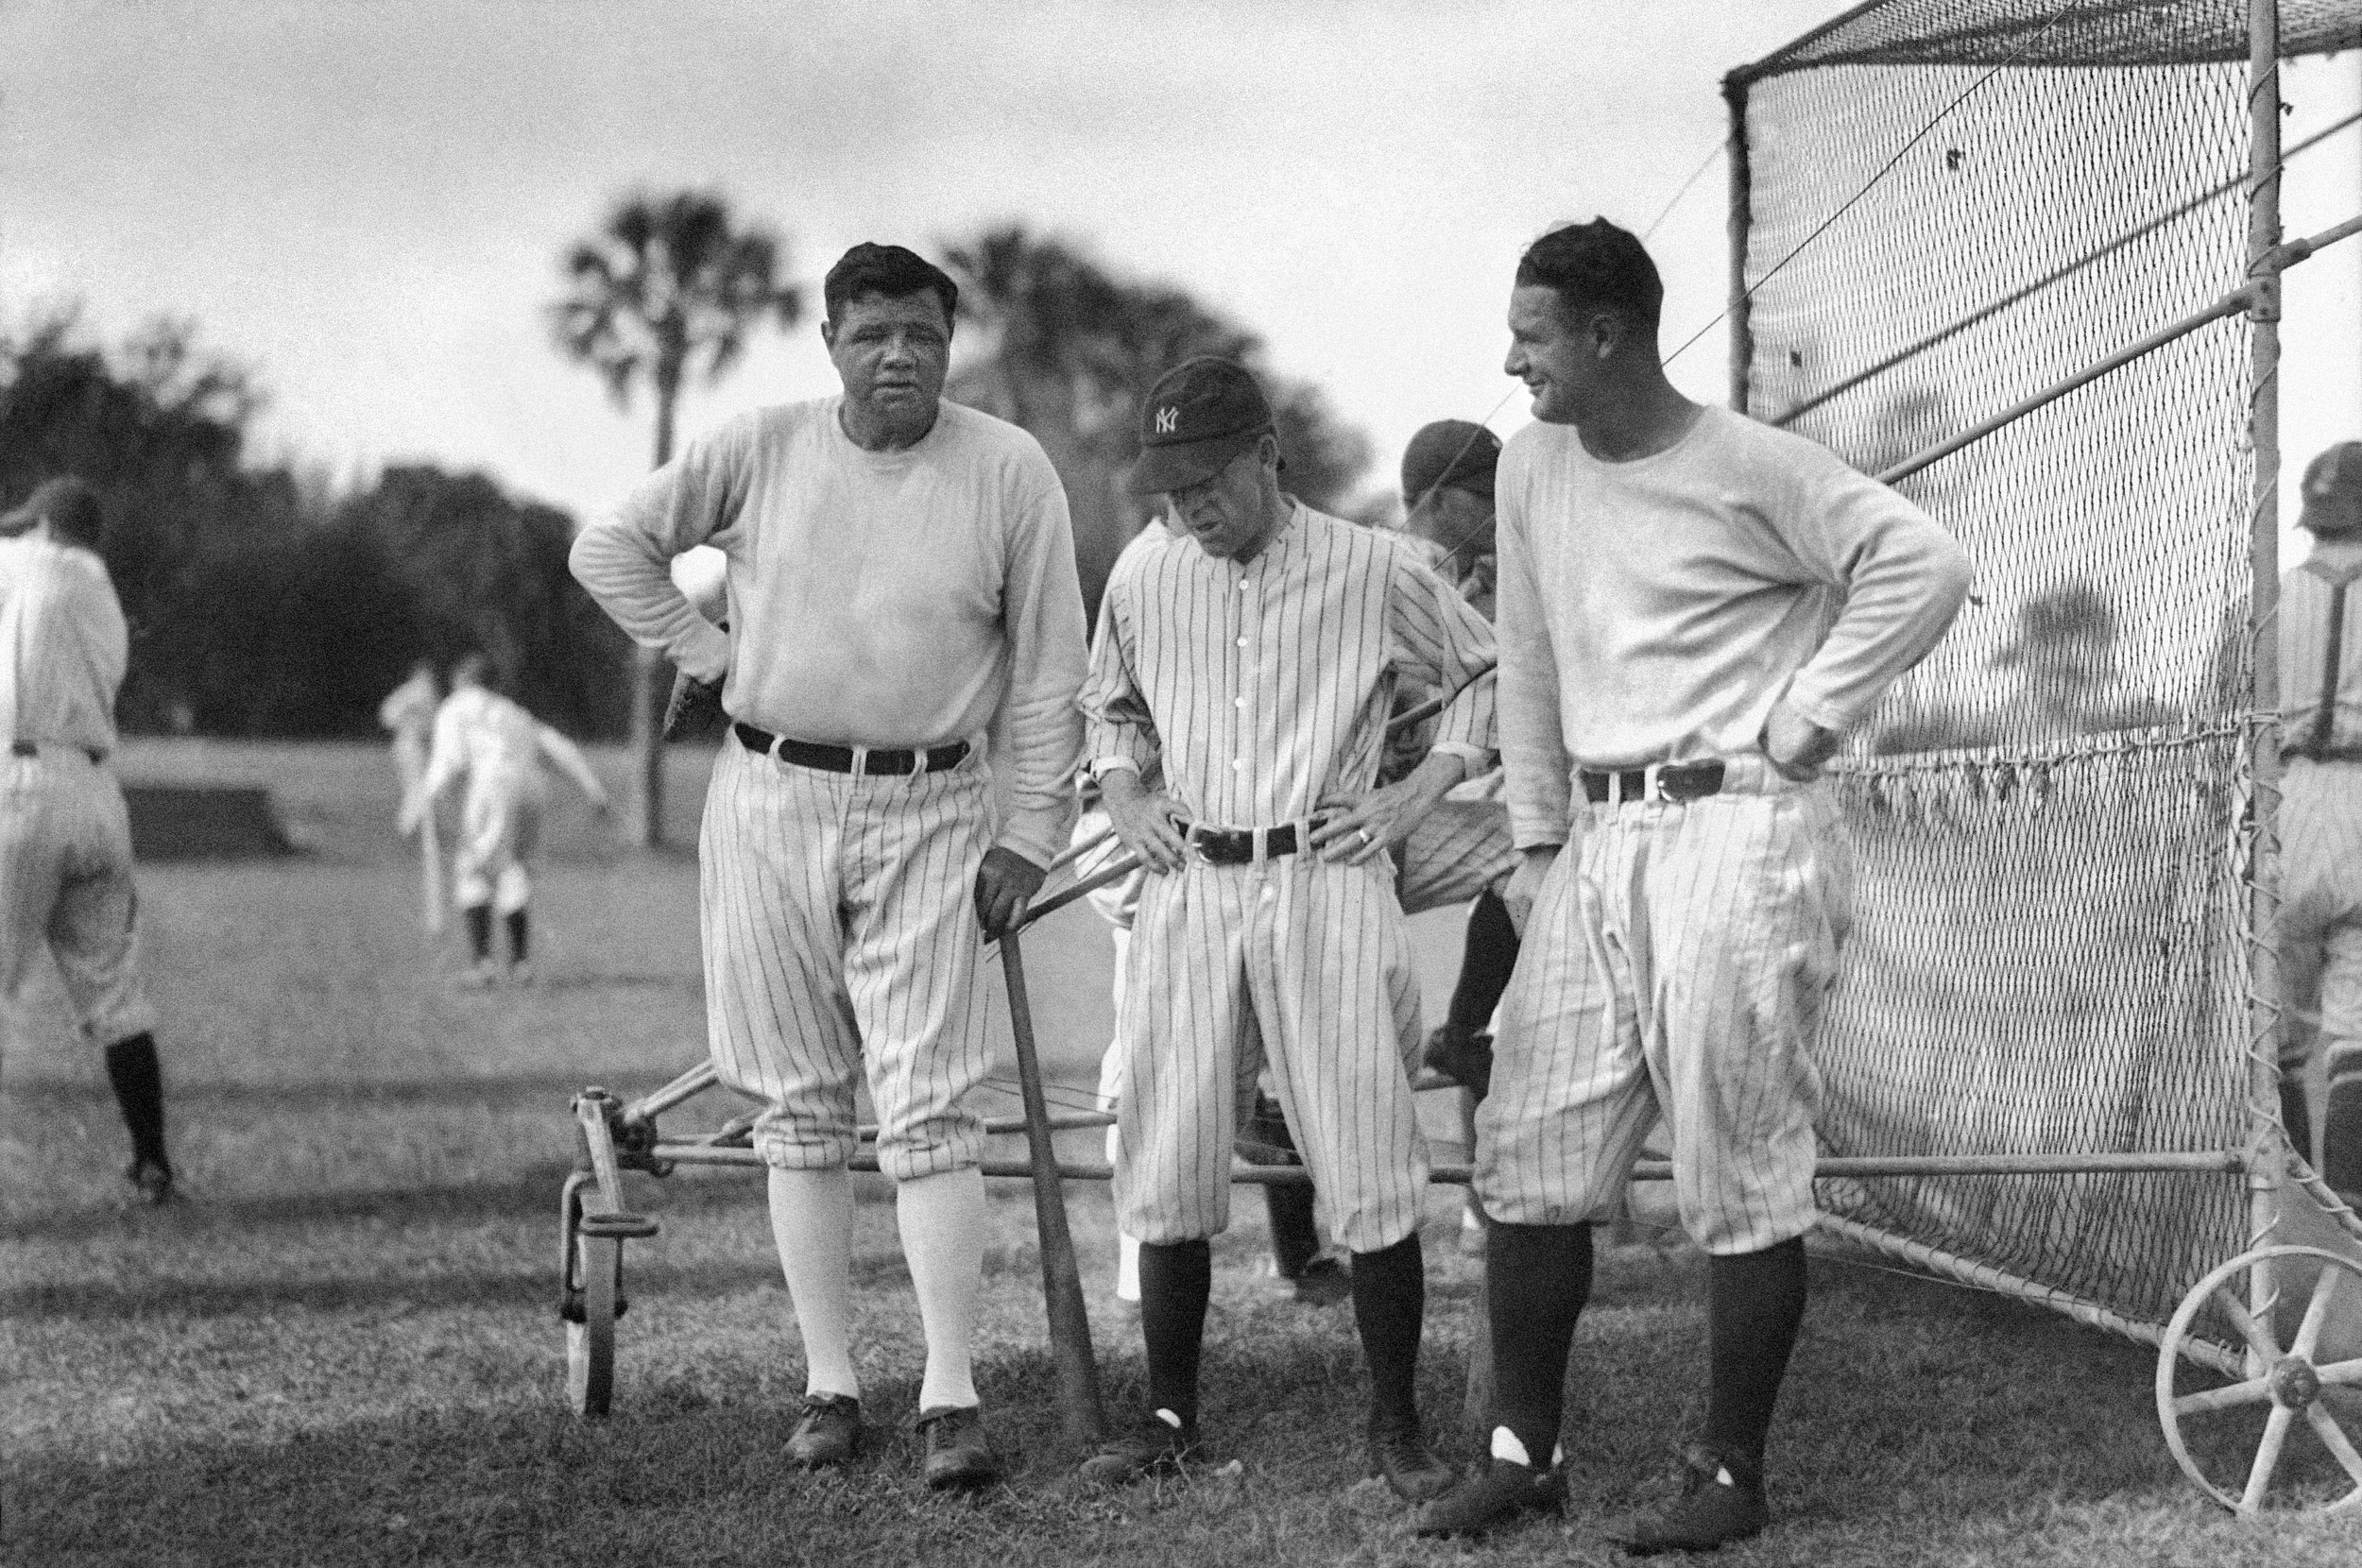  New York Yankees manager Miller Huggins, center, talks with his two most potent offensive weapons, sluggers Babe Ruth, left, and Lou Gehrig, at the batting cage during spring training in Florida in the late 1920s. In 1925 Huggins suspended and fined